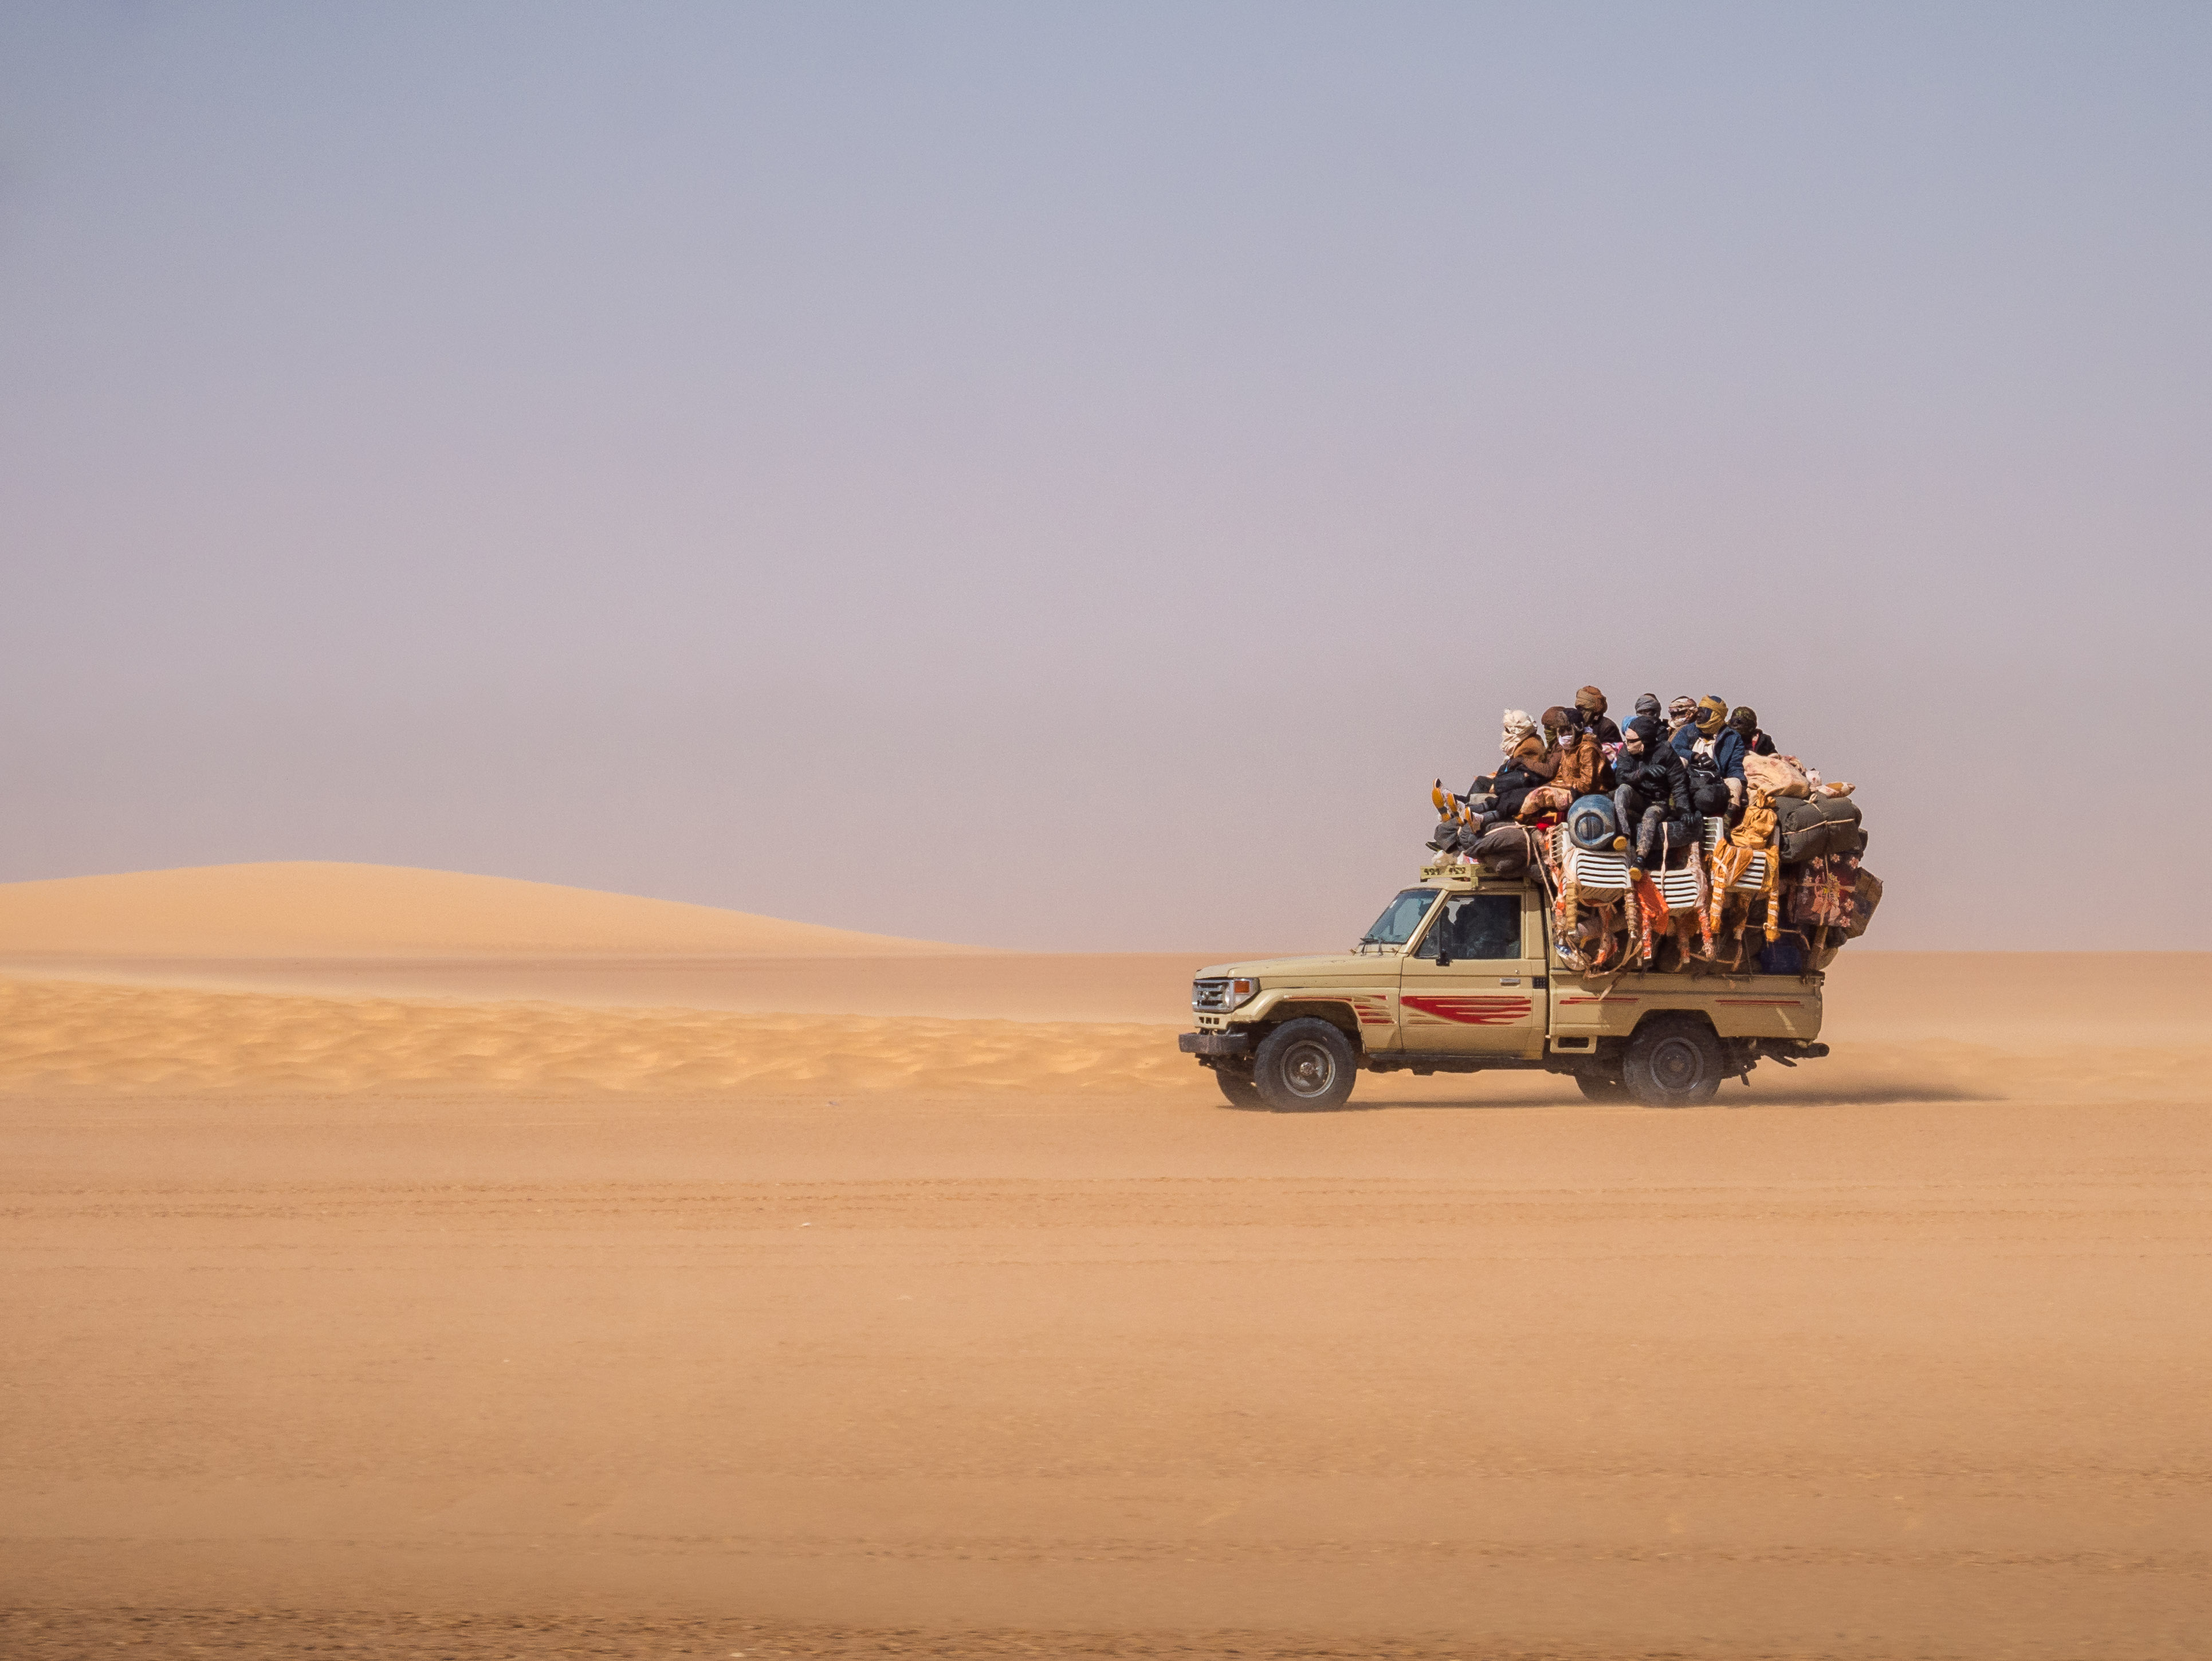 Chadian desert, photography by anmede (CC BY-SA 2.0)